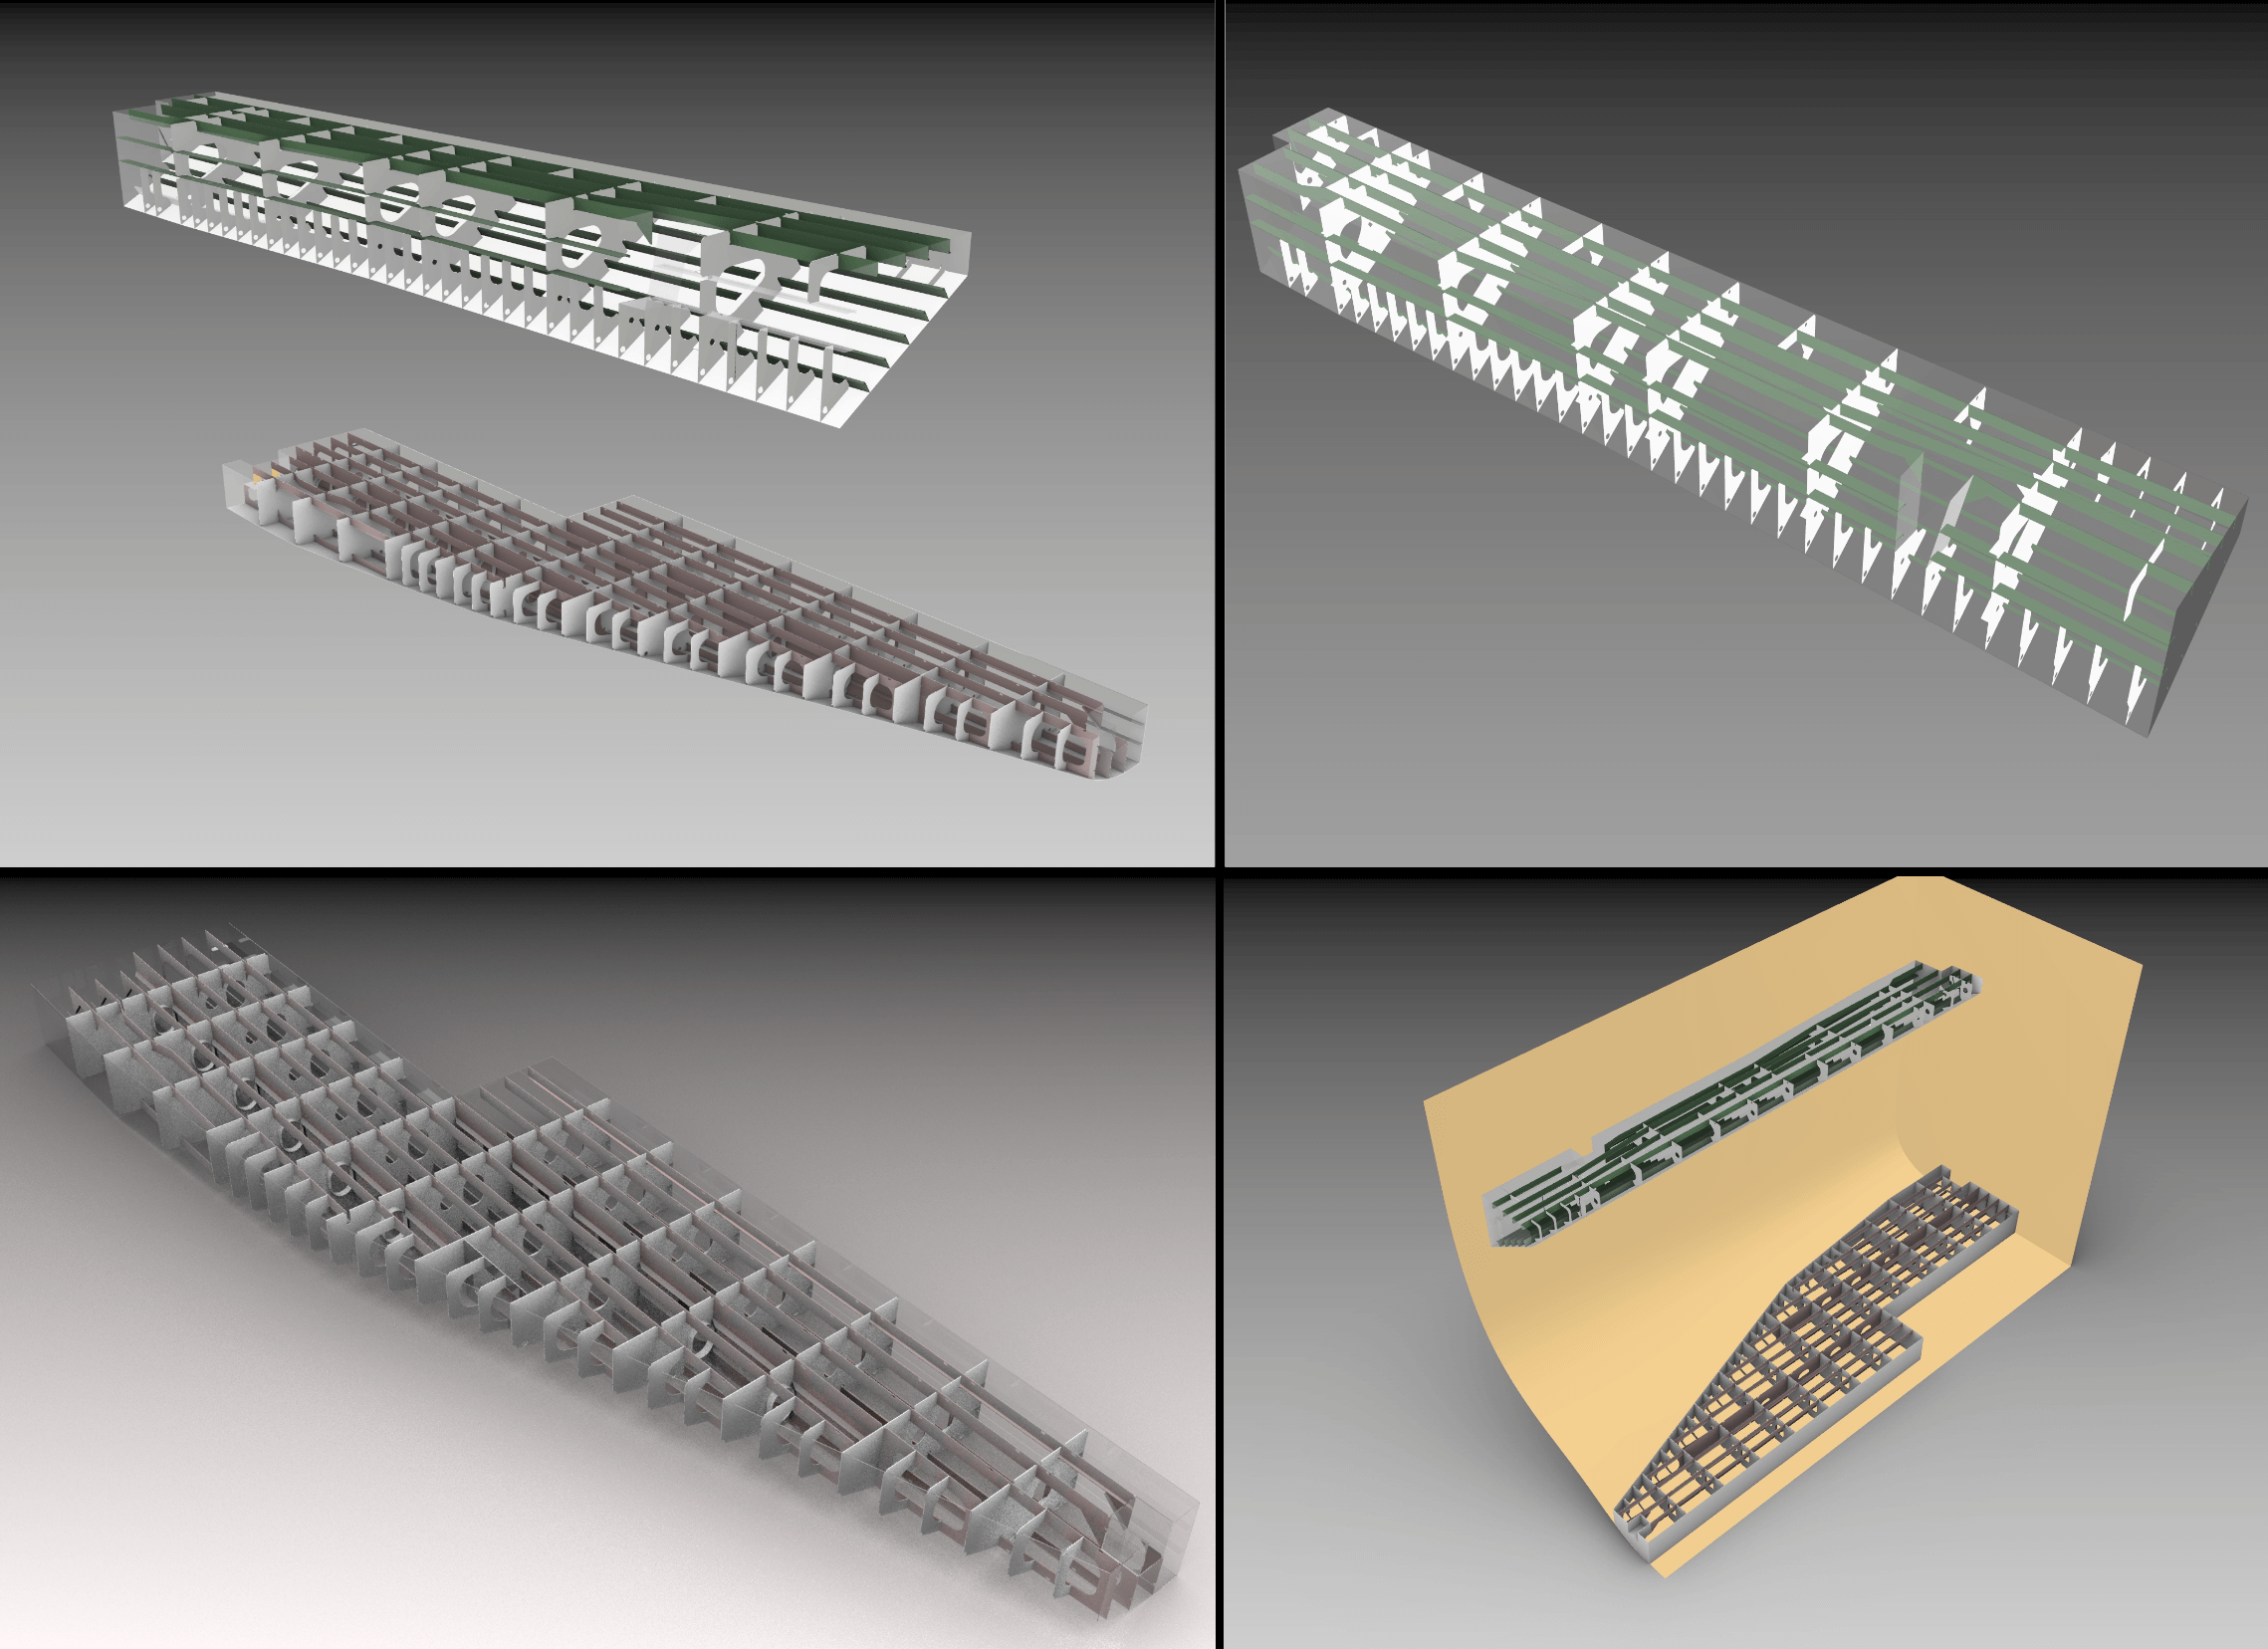 3D model of tanks with supports in various views